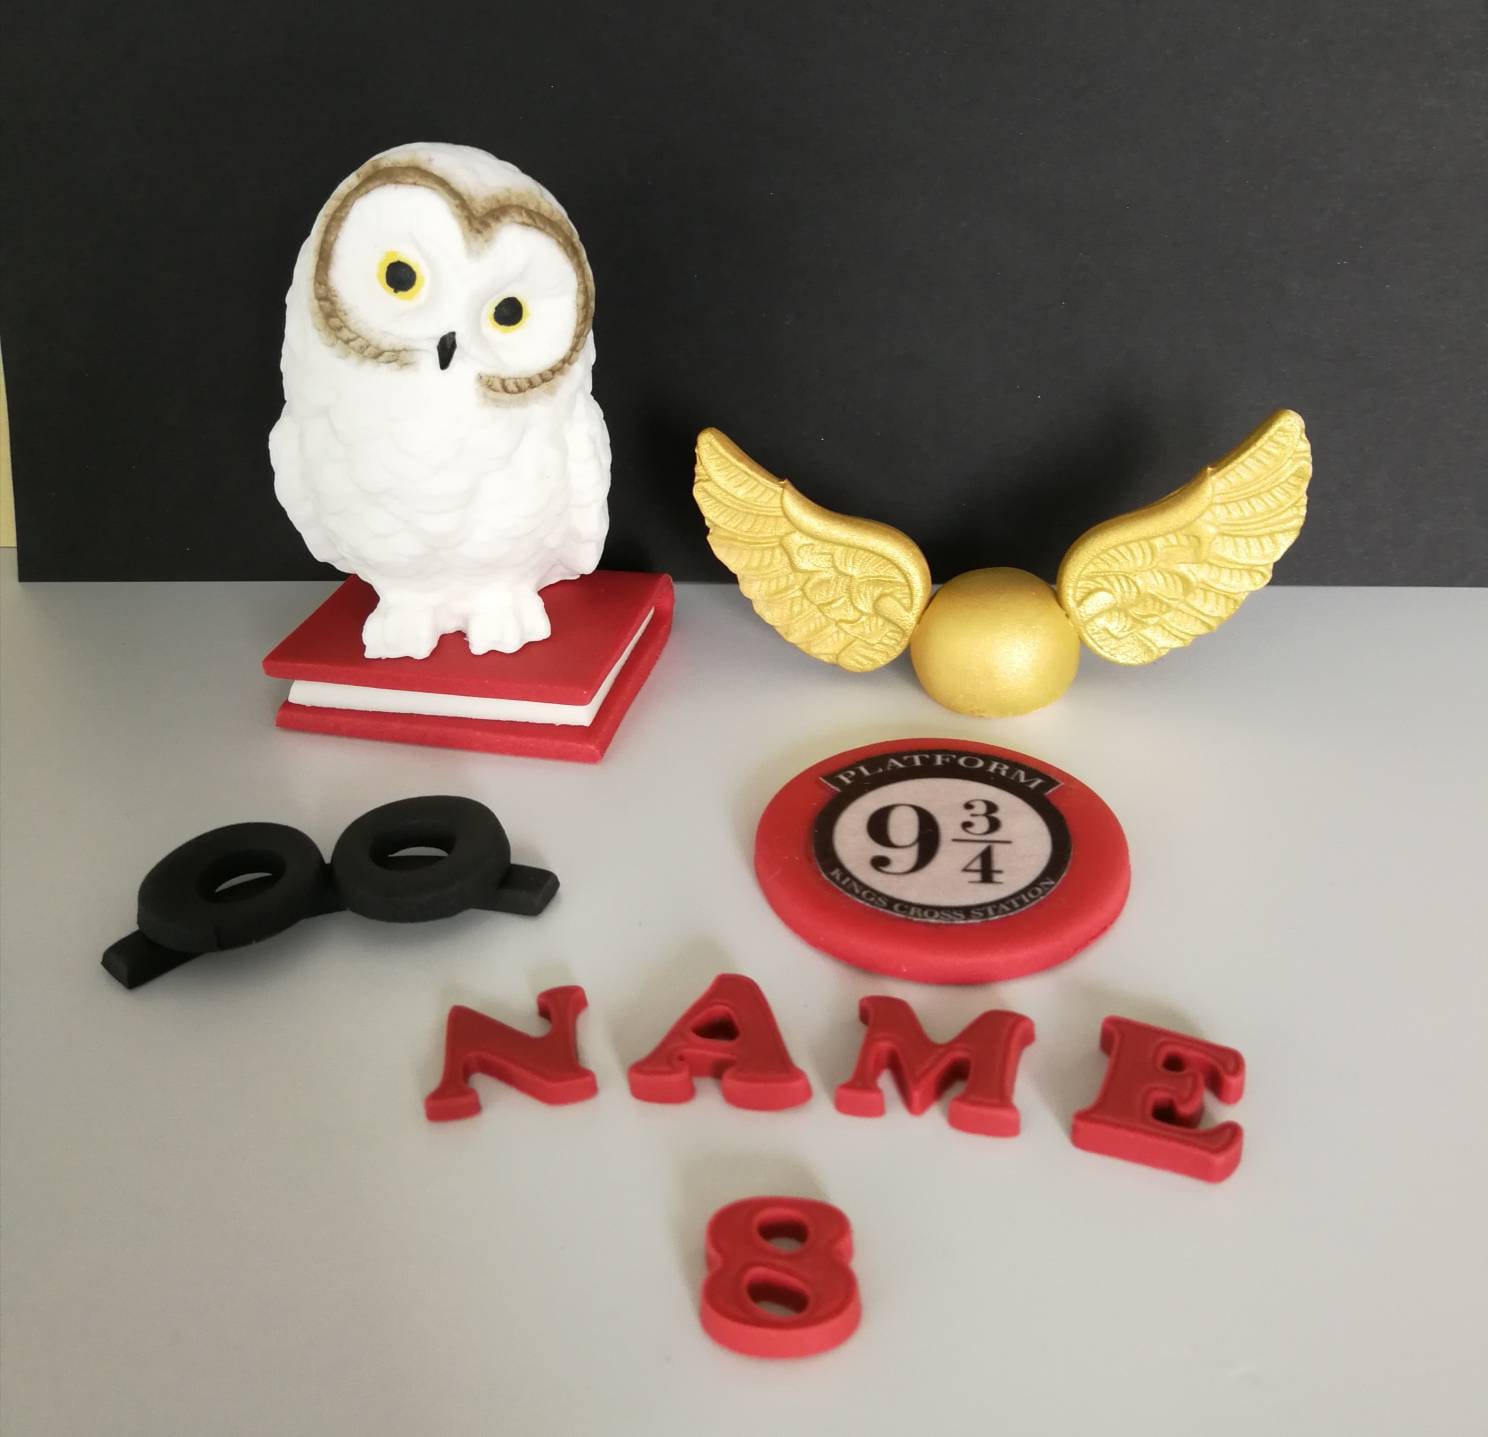 Hedwig Owl Cookie Cutter ($9)  These Harry Potter Cookie Cutters